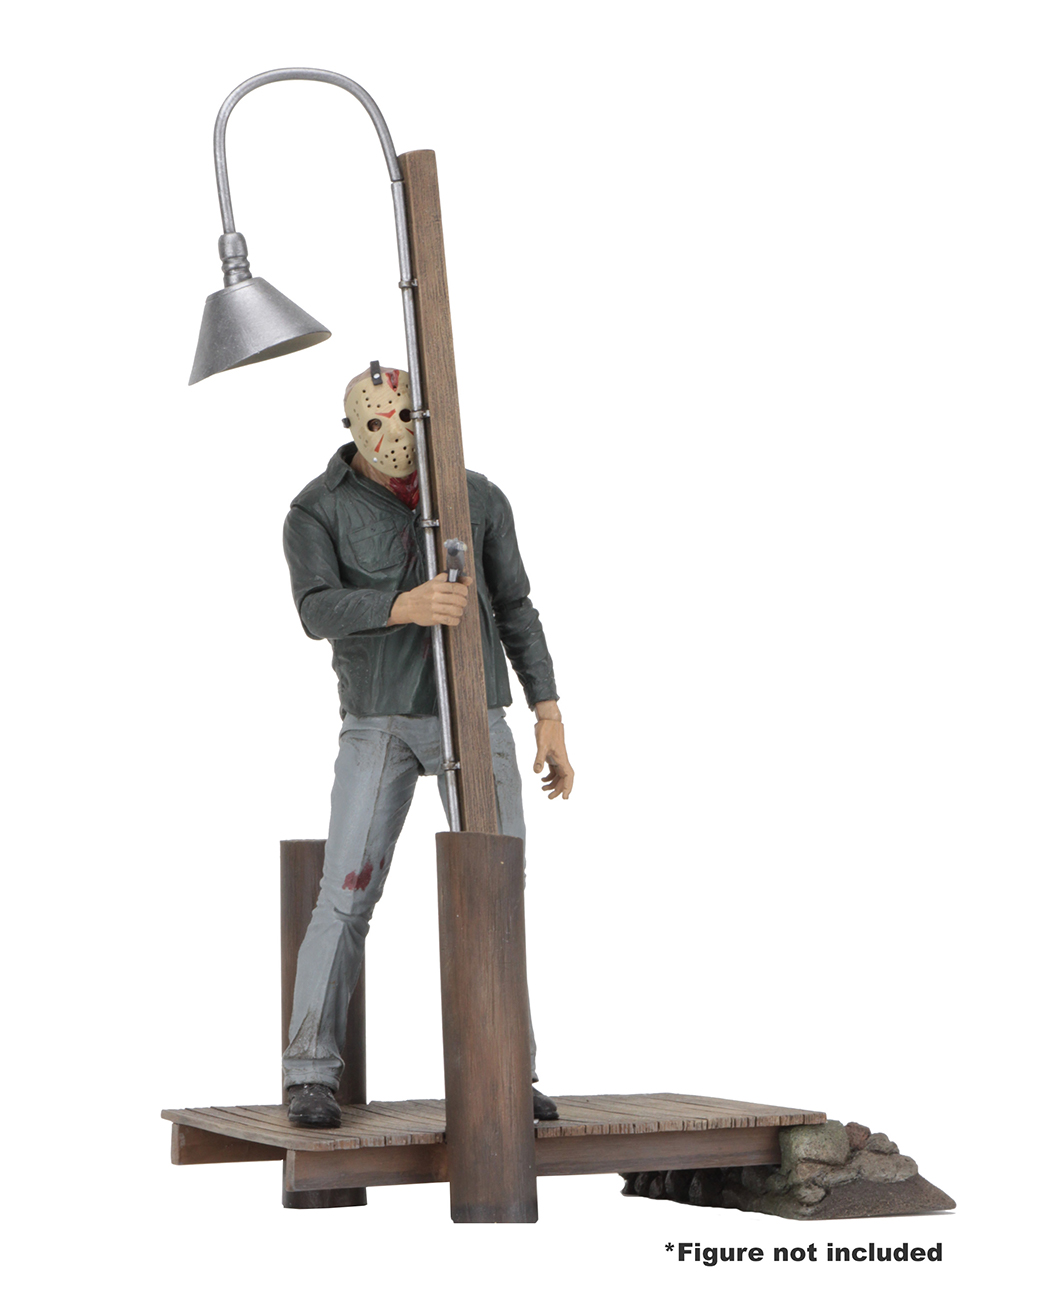 neca friday the 13th accessory pack